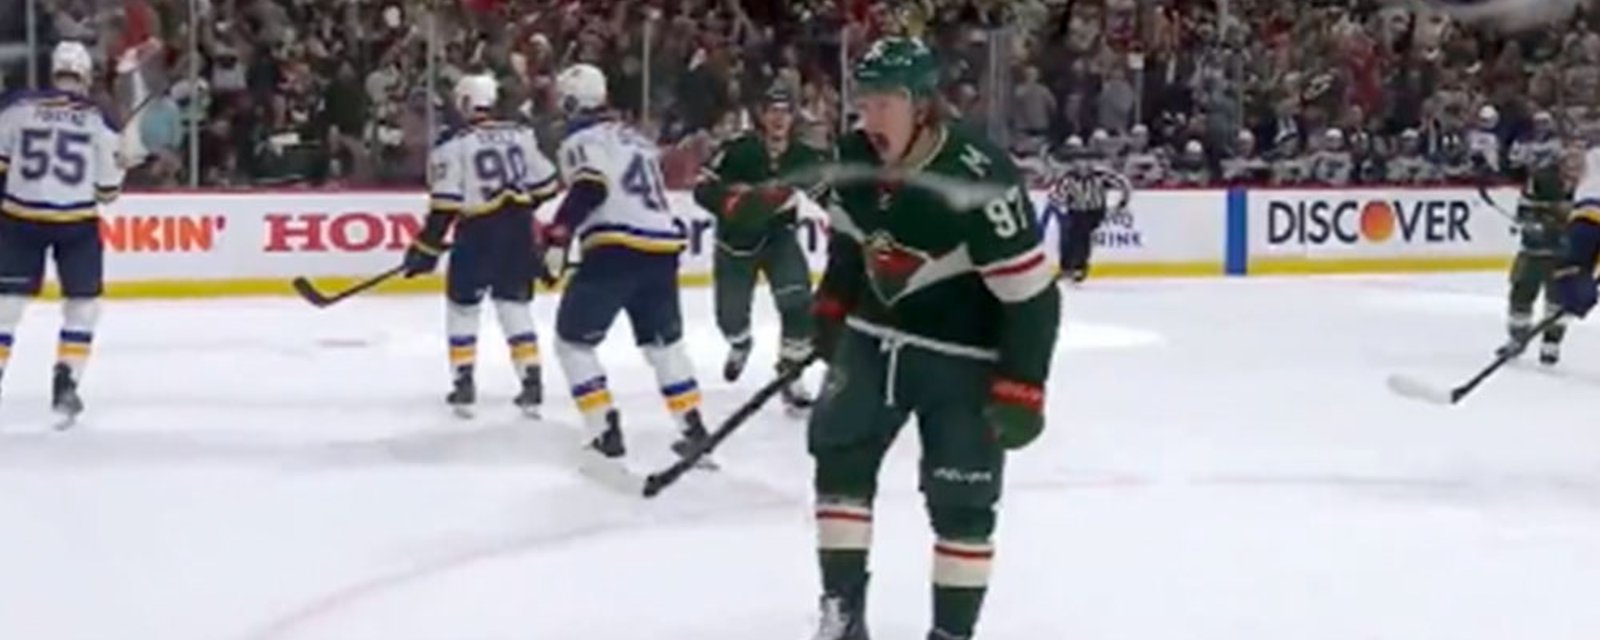 Kaprizov gives the Wild the lead with an insane snipe